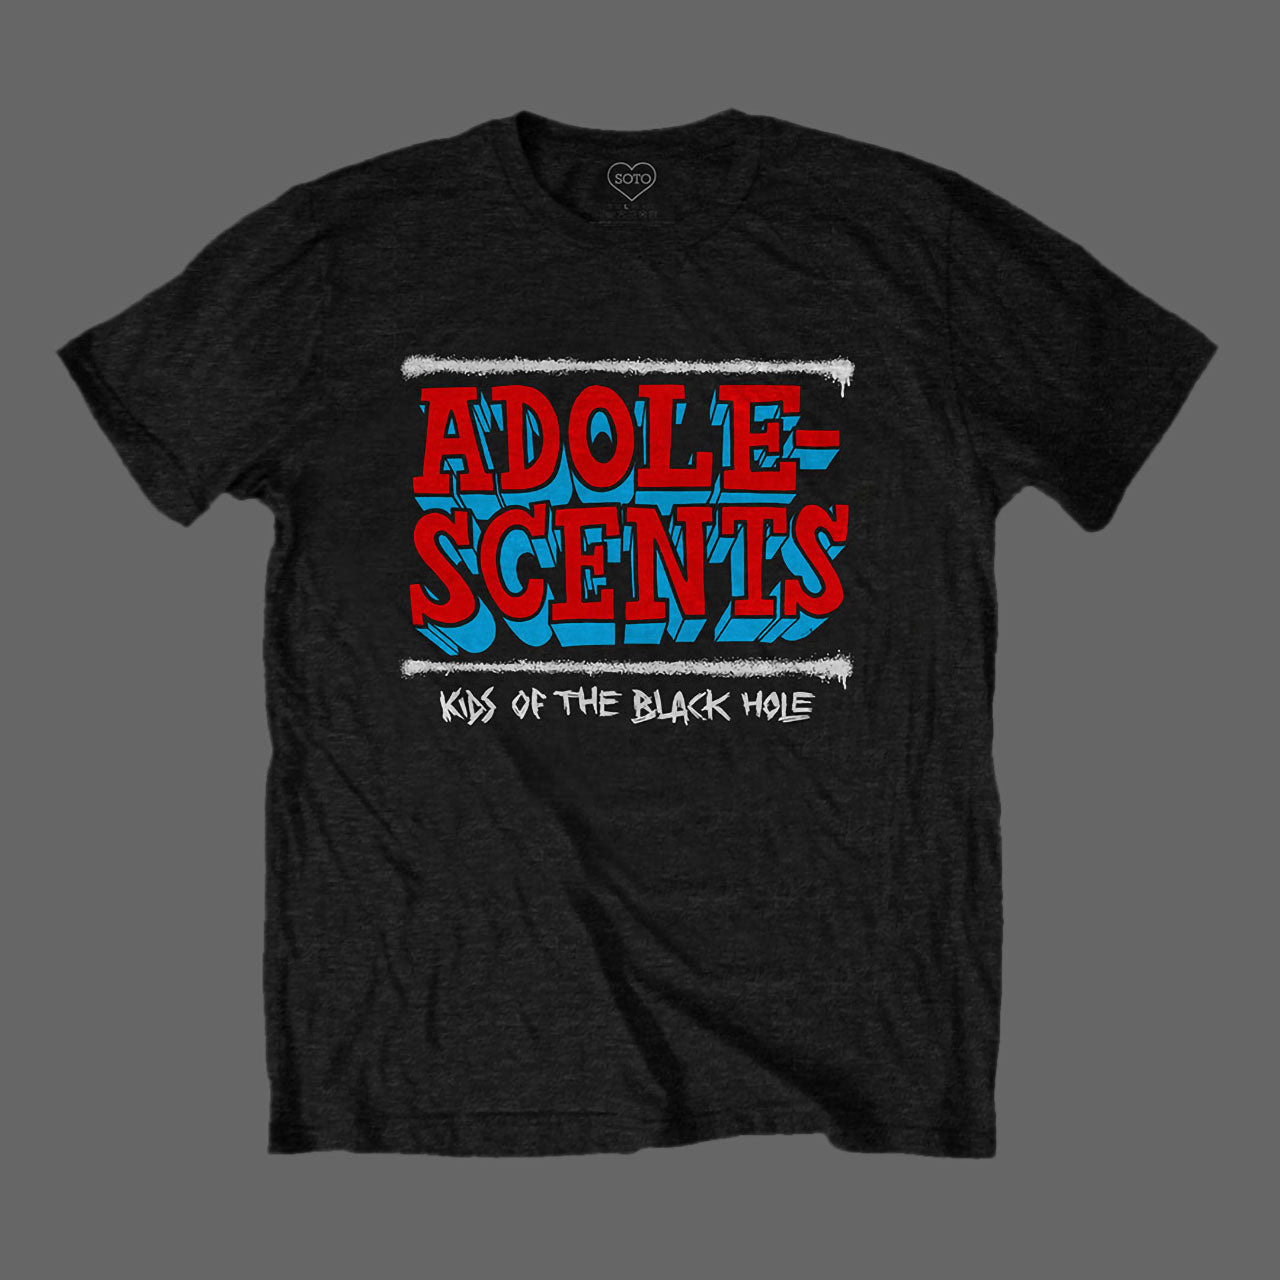 Adolescents - Kids of the Black Hole (Black) (T-Shirt)